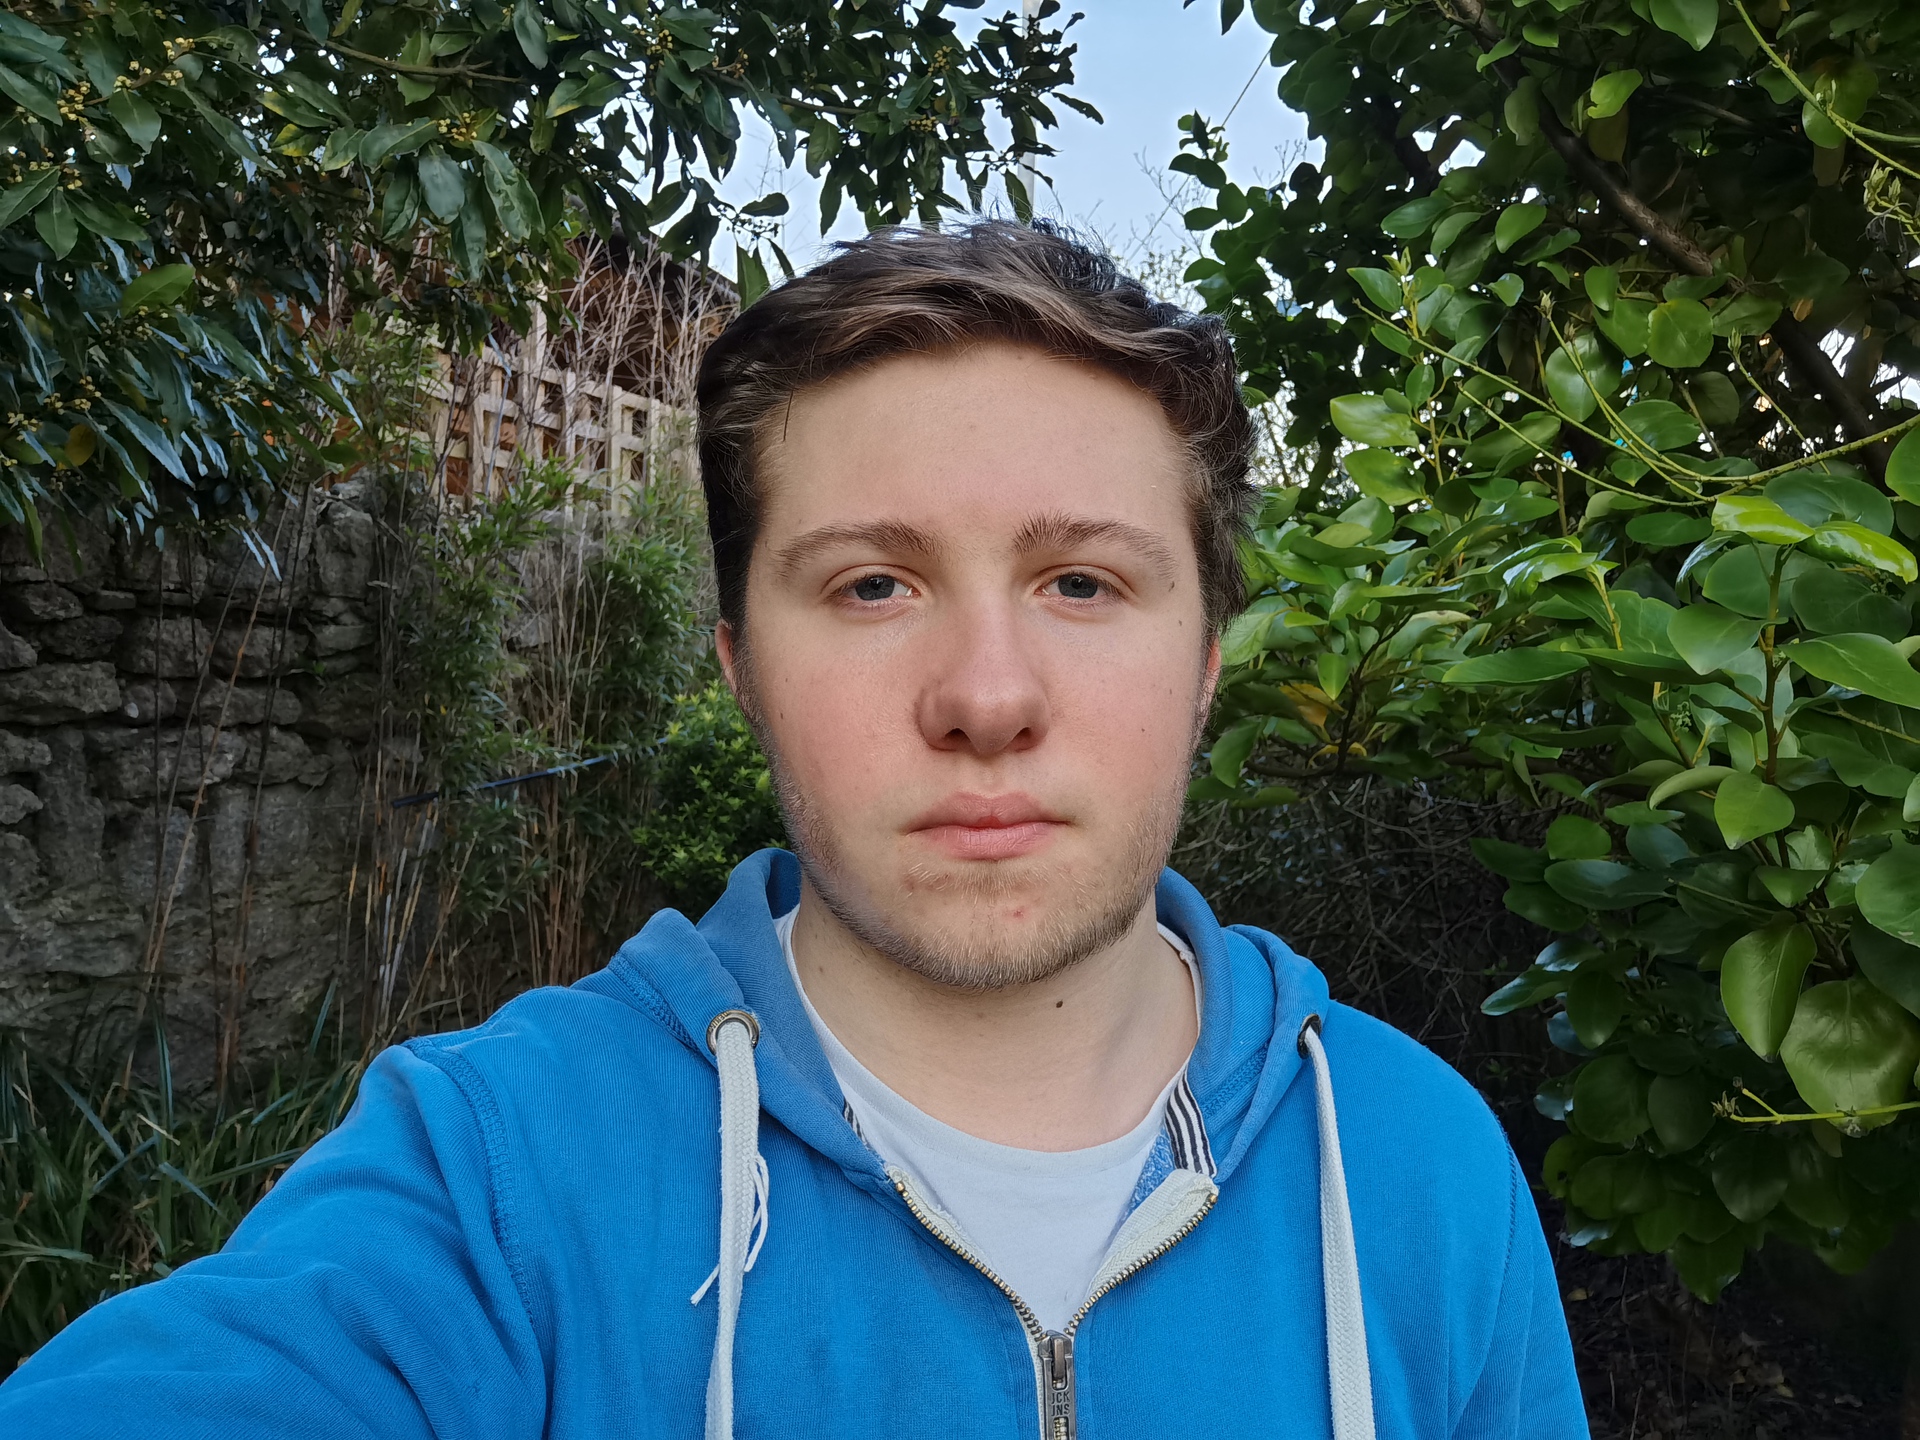 P40 Pro camera sample Selfie outdoors HDR test